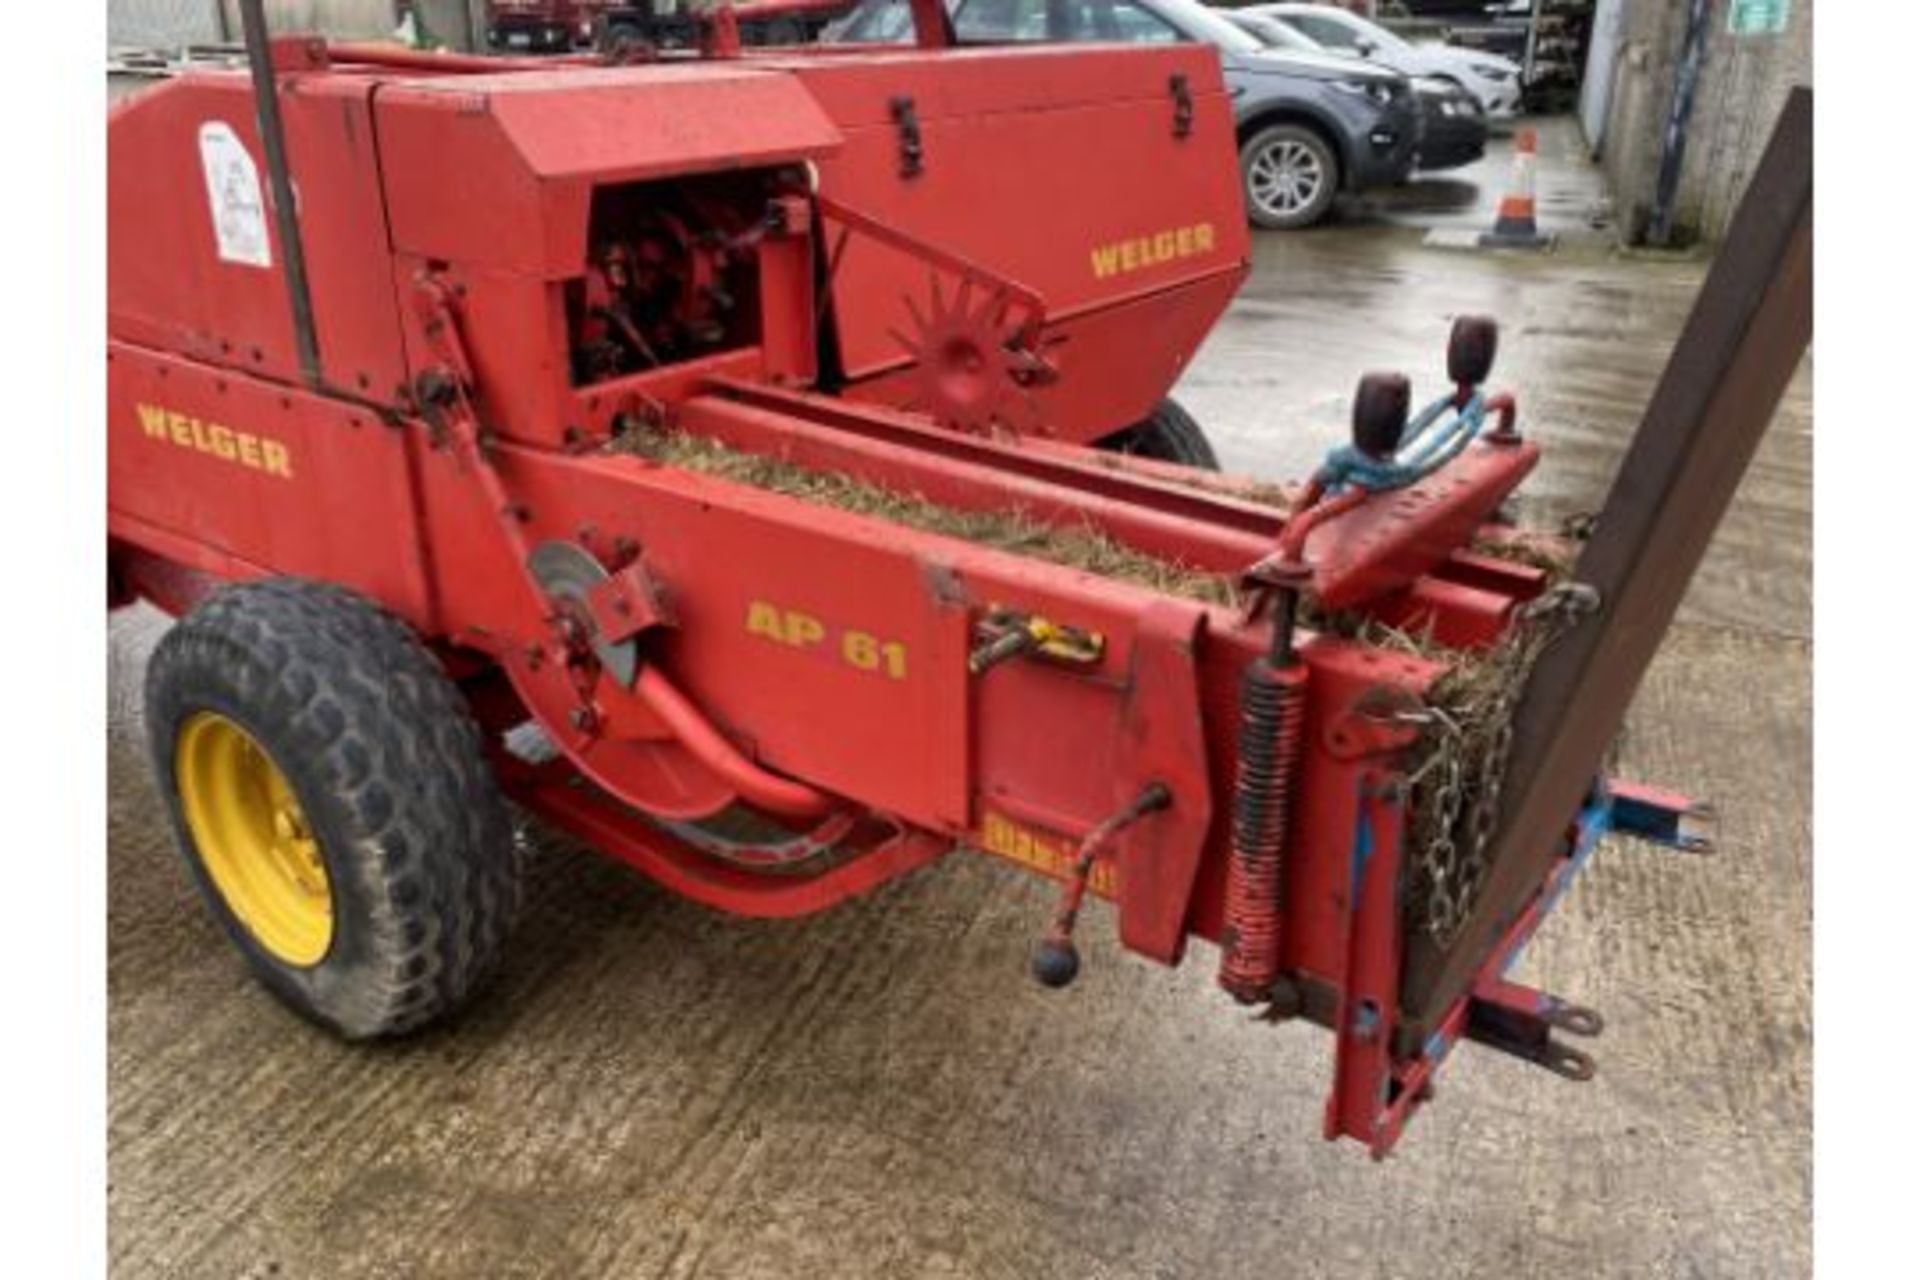 WELGAR SQUARE BALER  LOCATED IN NORTHERN IRELAND - Image 2 of 12